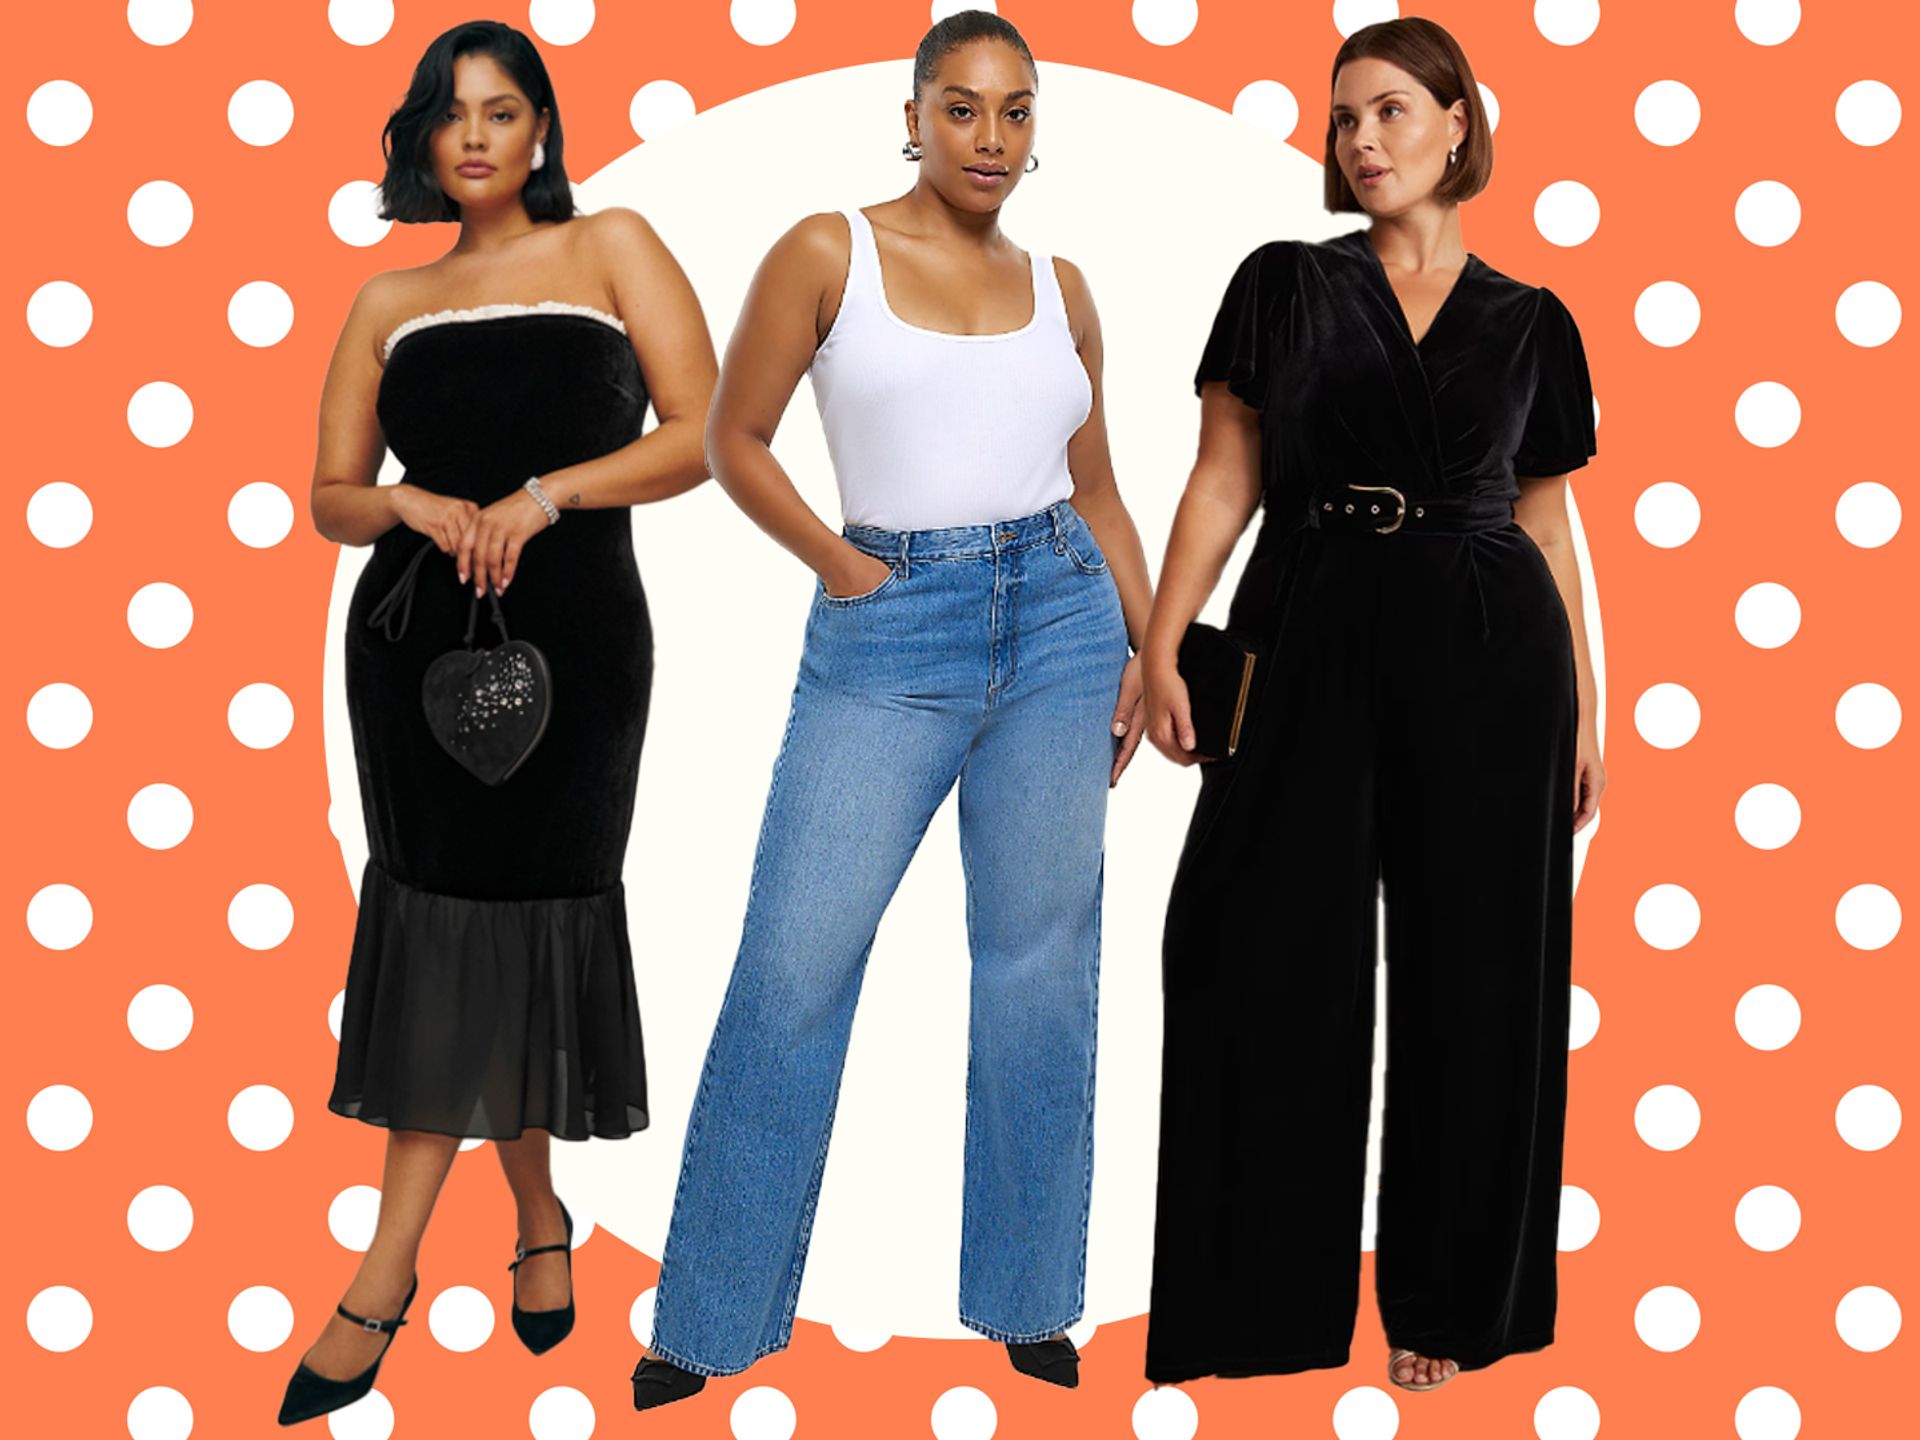 Curvy girls look badass in leather. The coolest plus-size pieces